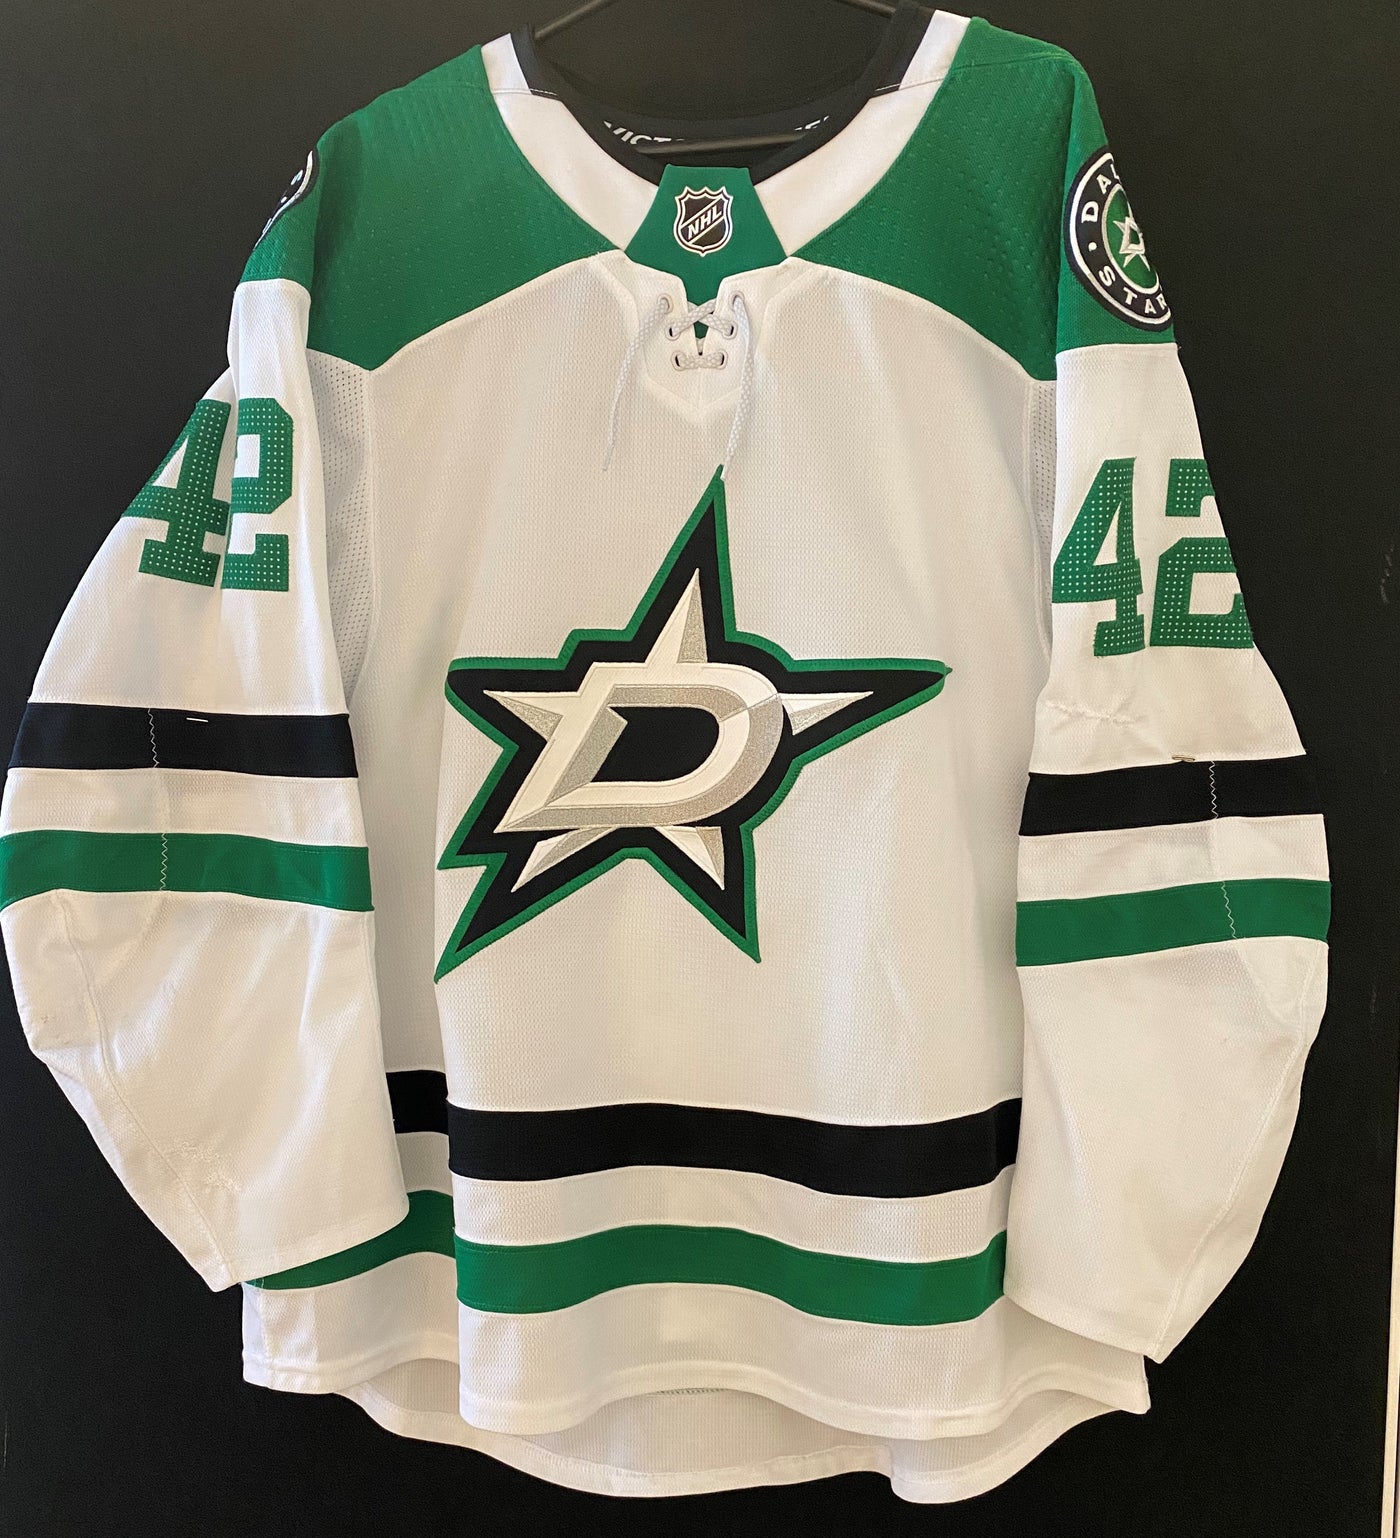 Taylor Fedun 19/20 Game Worn Away Jersey Set 1 in Green and White - Front View